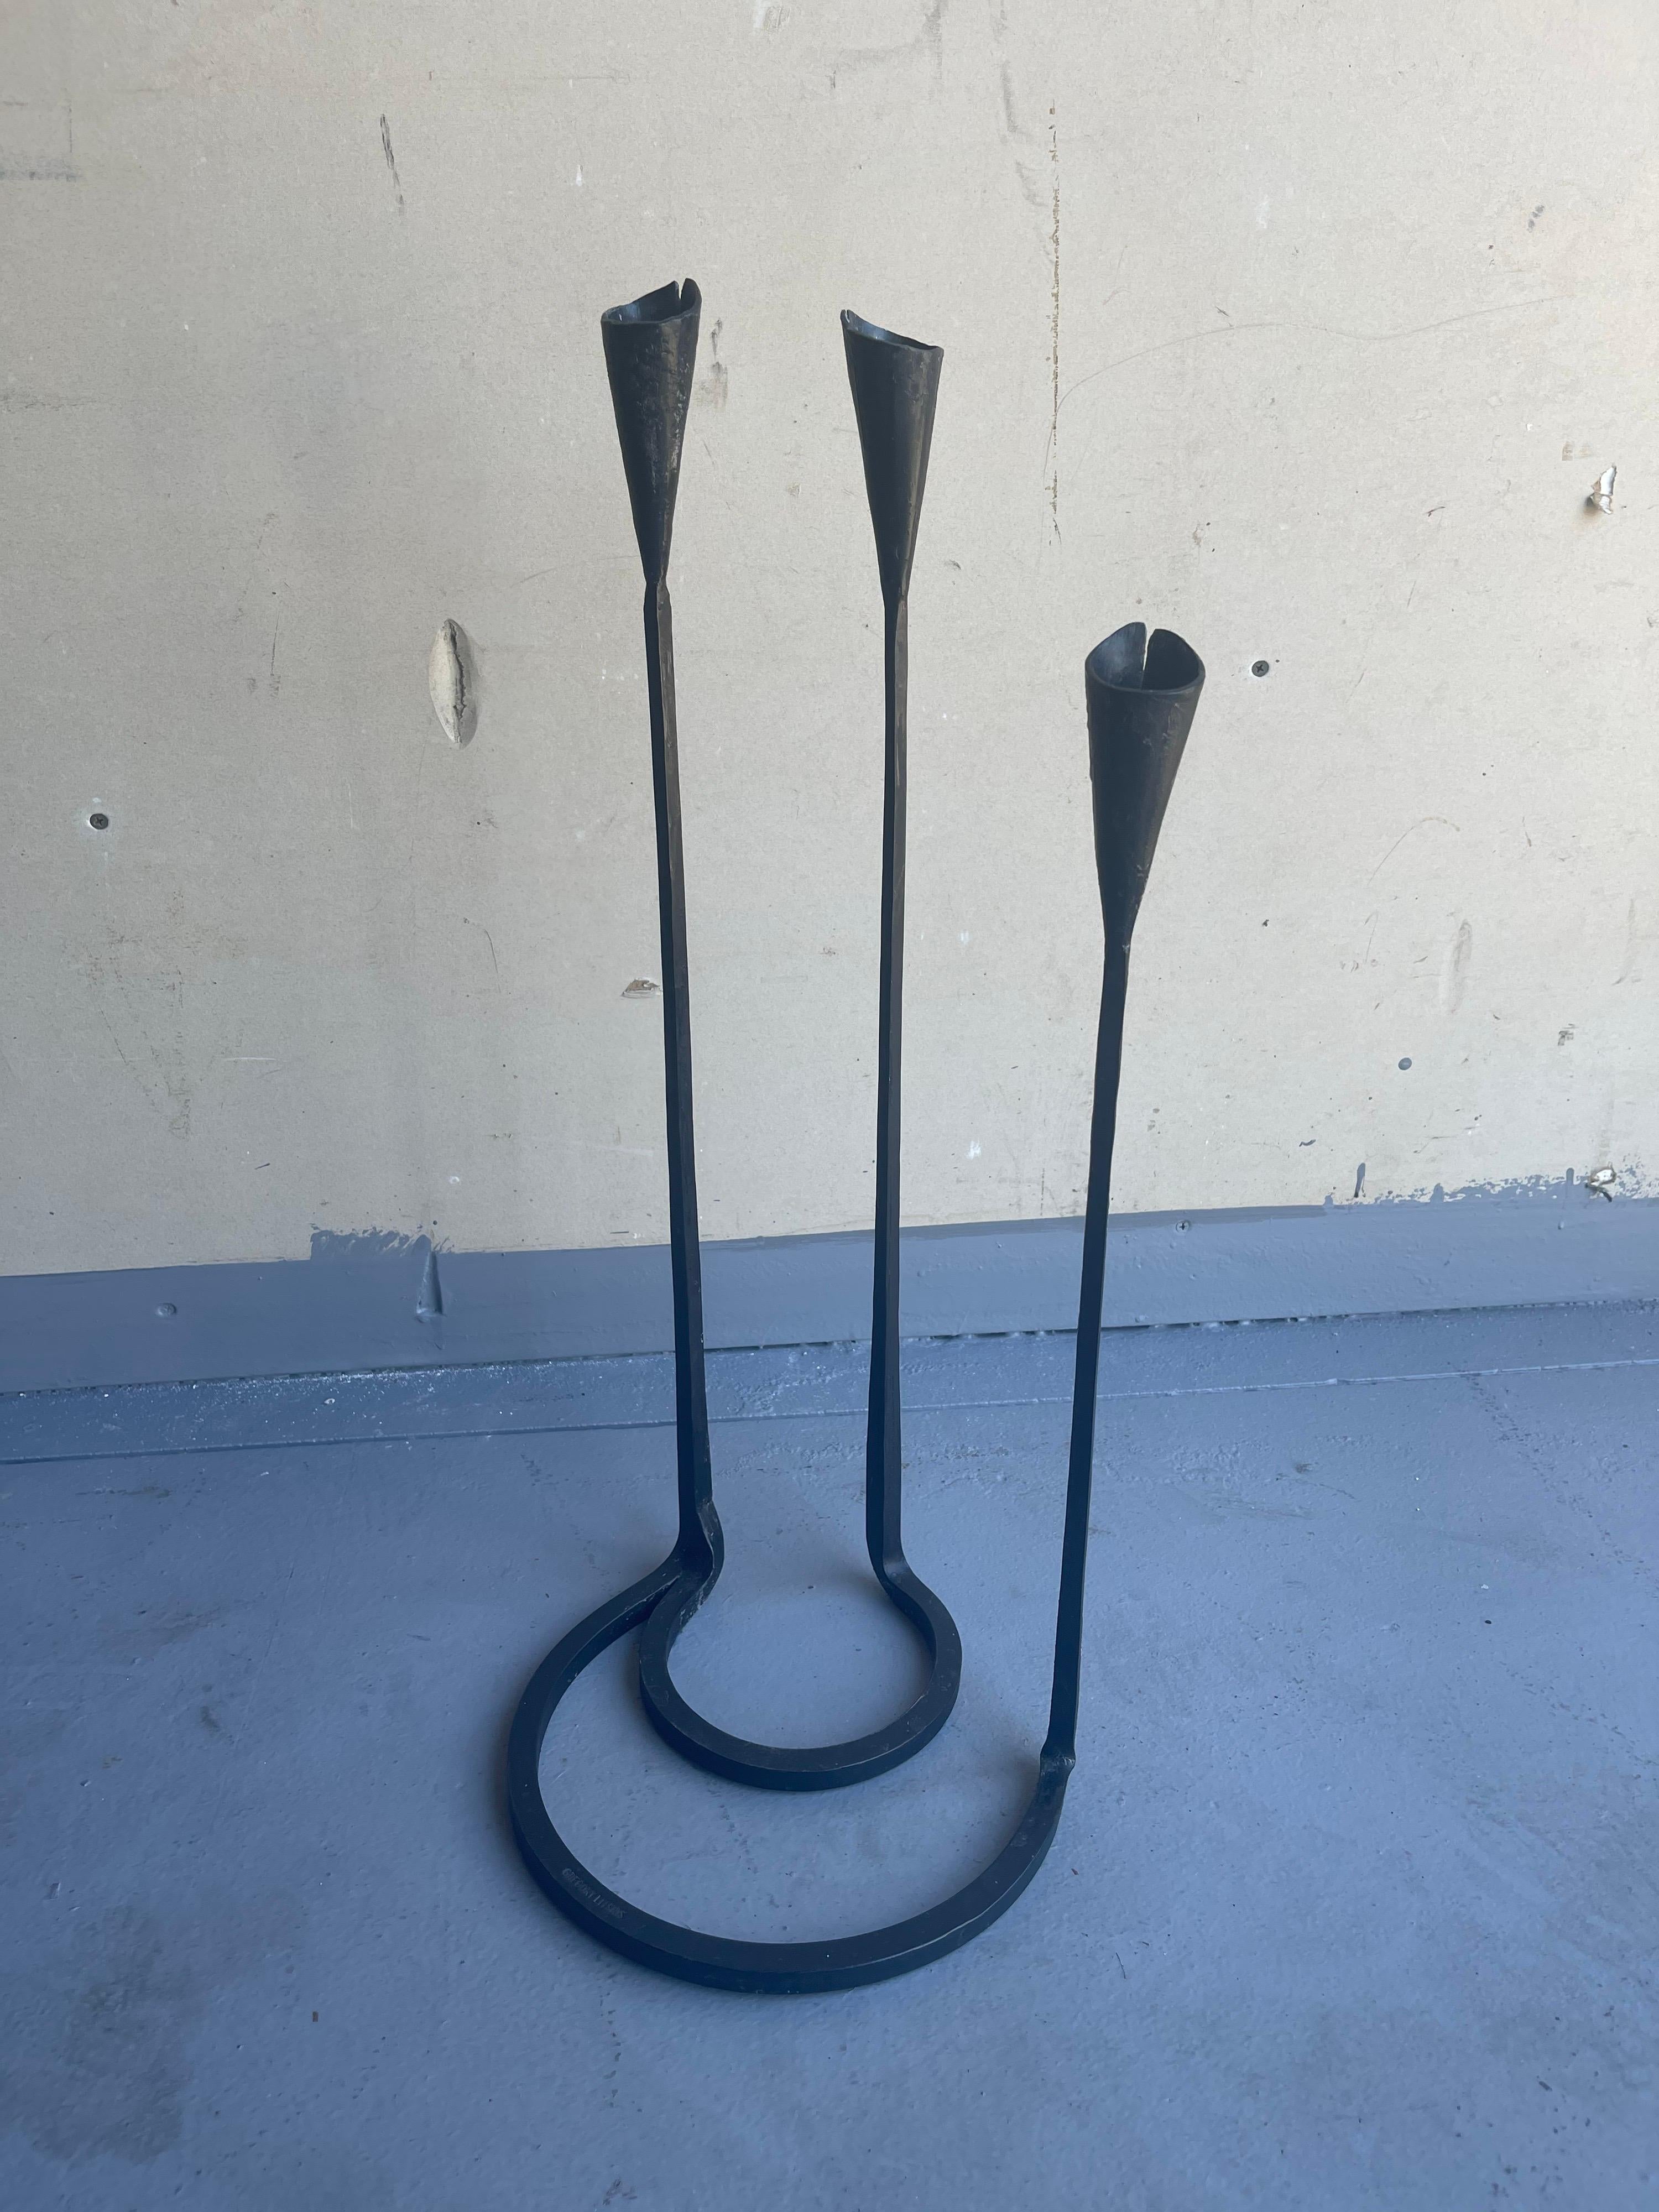 Rare wrought iron modernist triple candleholder by Gregory Litsios, circa 1970s. The piece is in very good vintage condition and measures 9.5